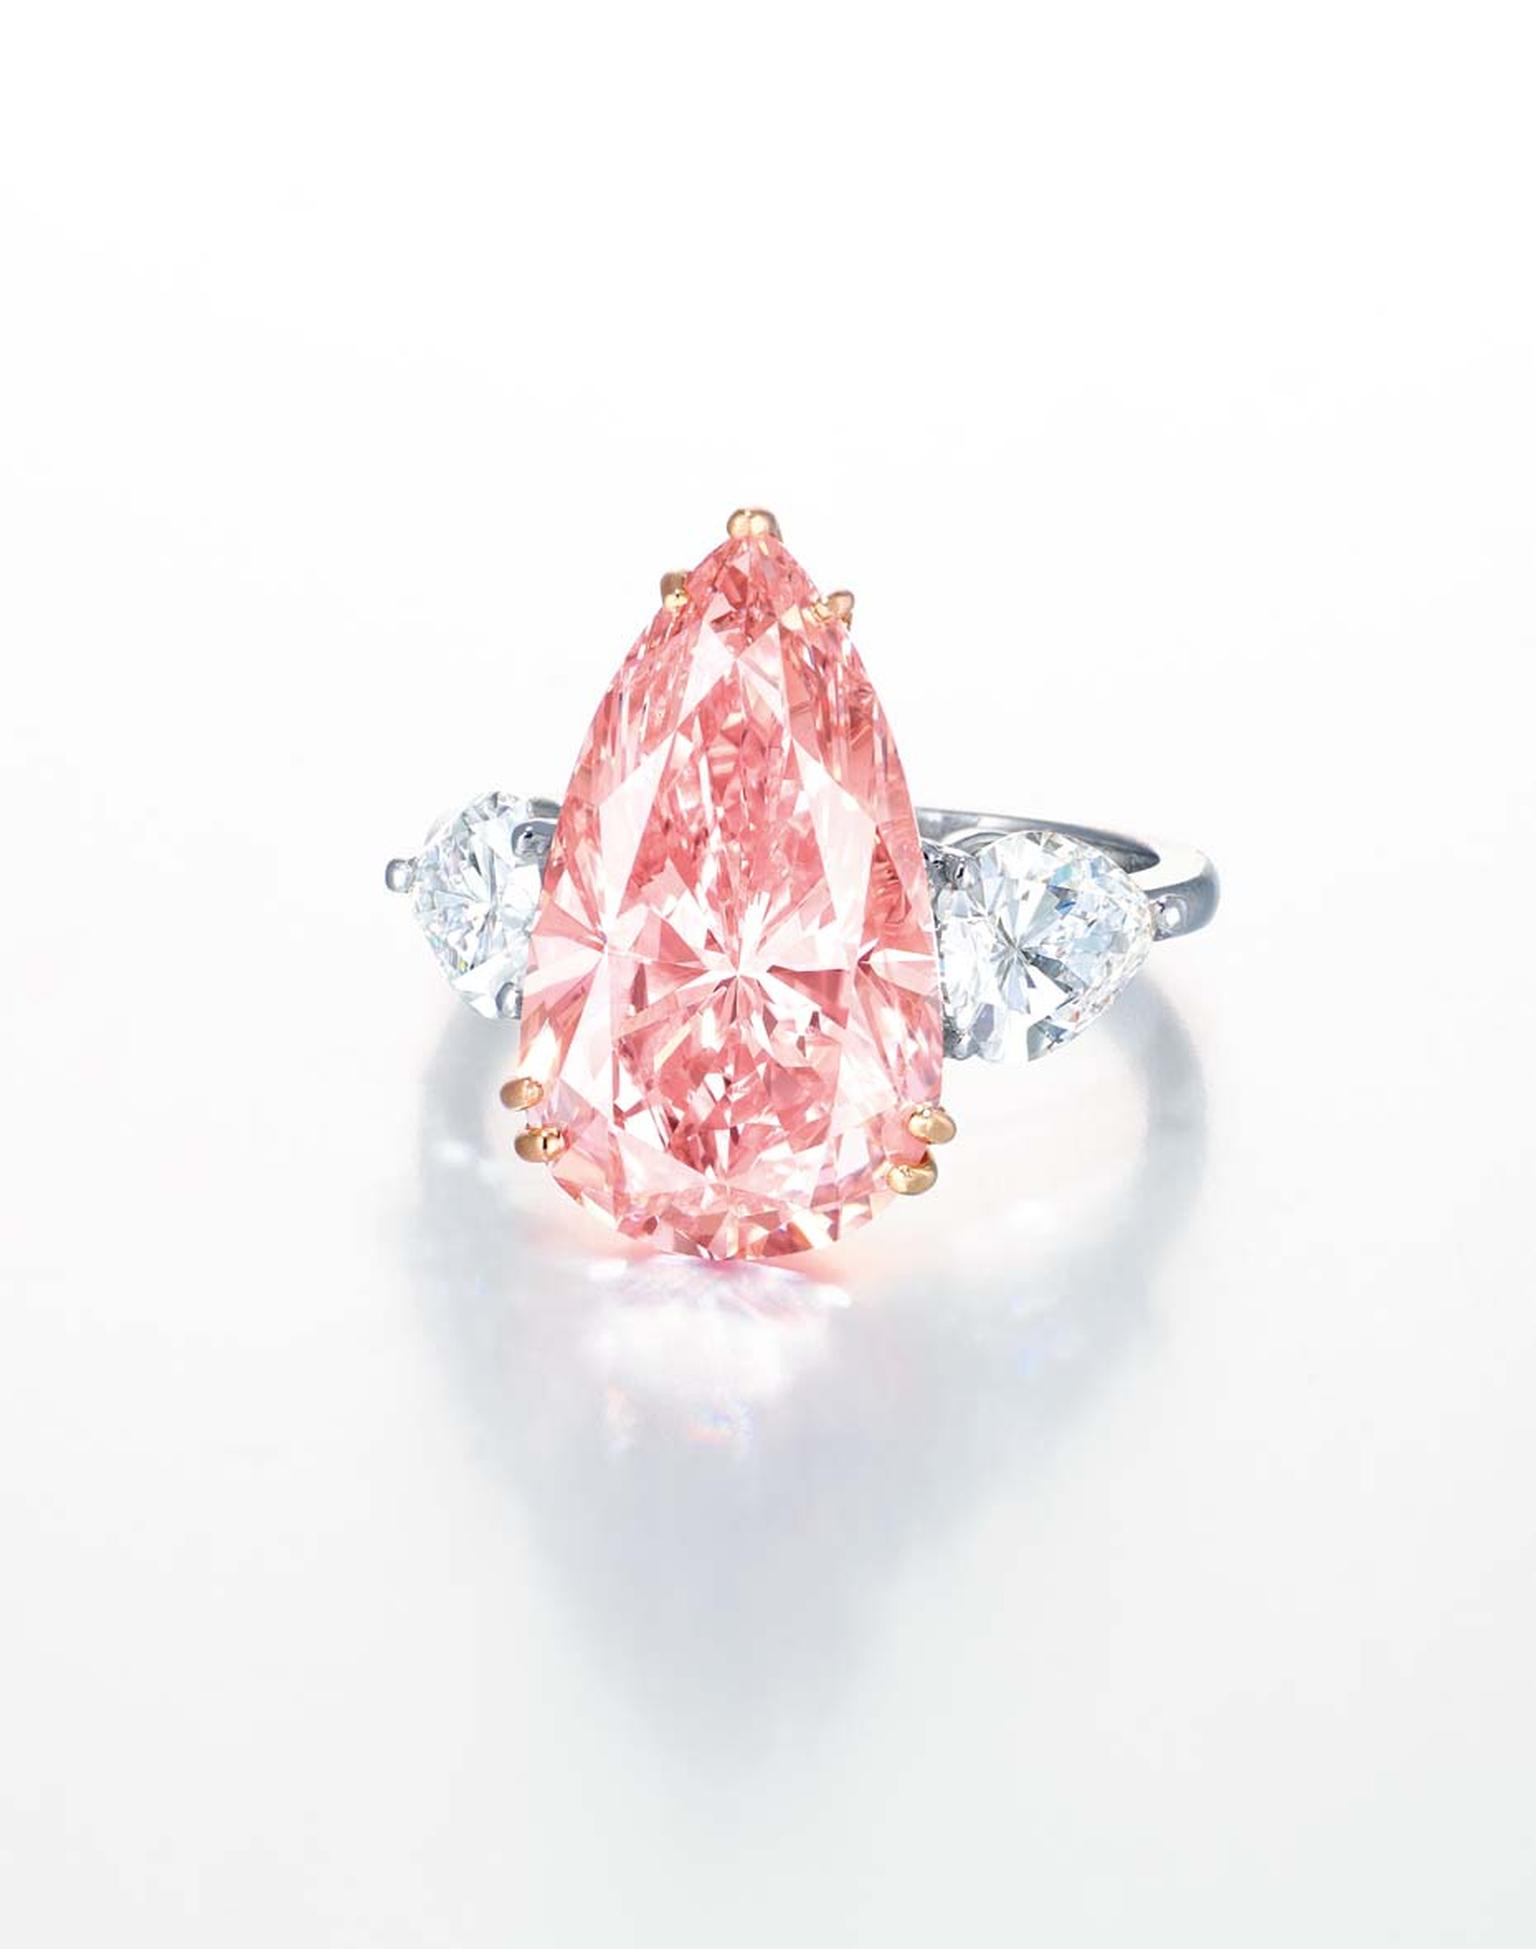 This 9.38ct Fancy Intense pink pear-shaped diamond and diamond ring has an estimate of  US$5.8-8.3 million)